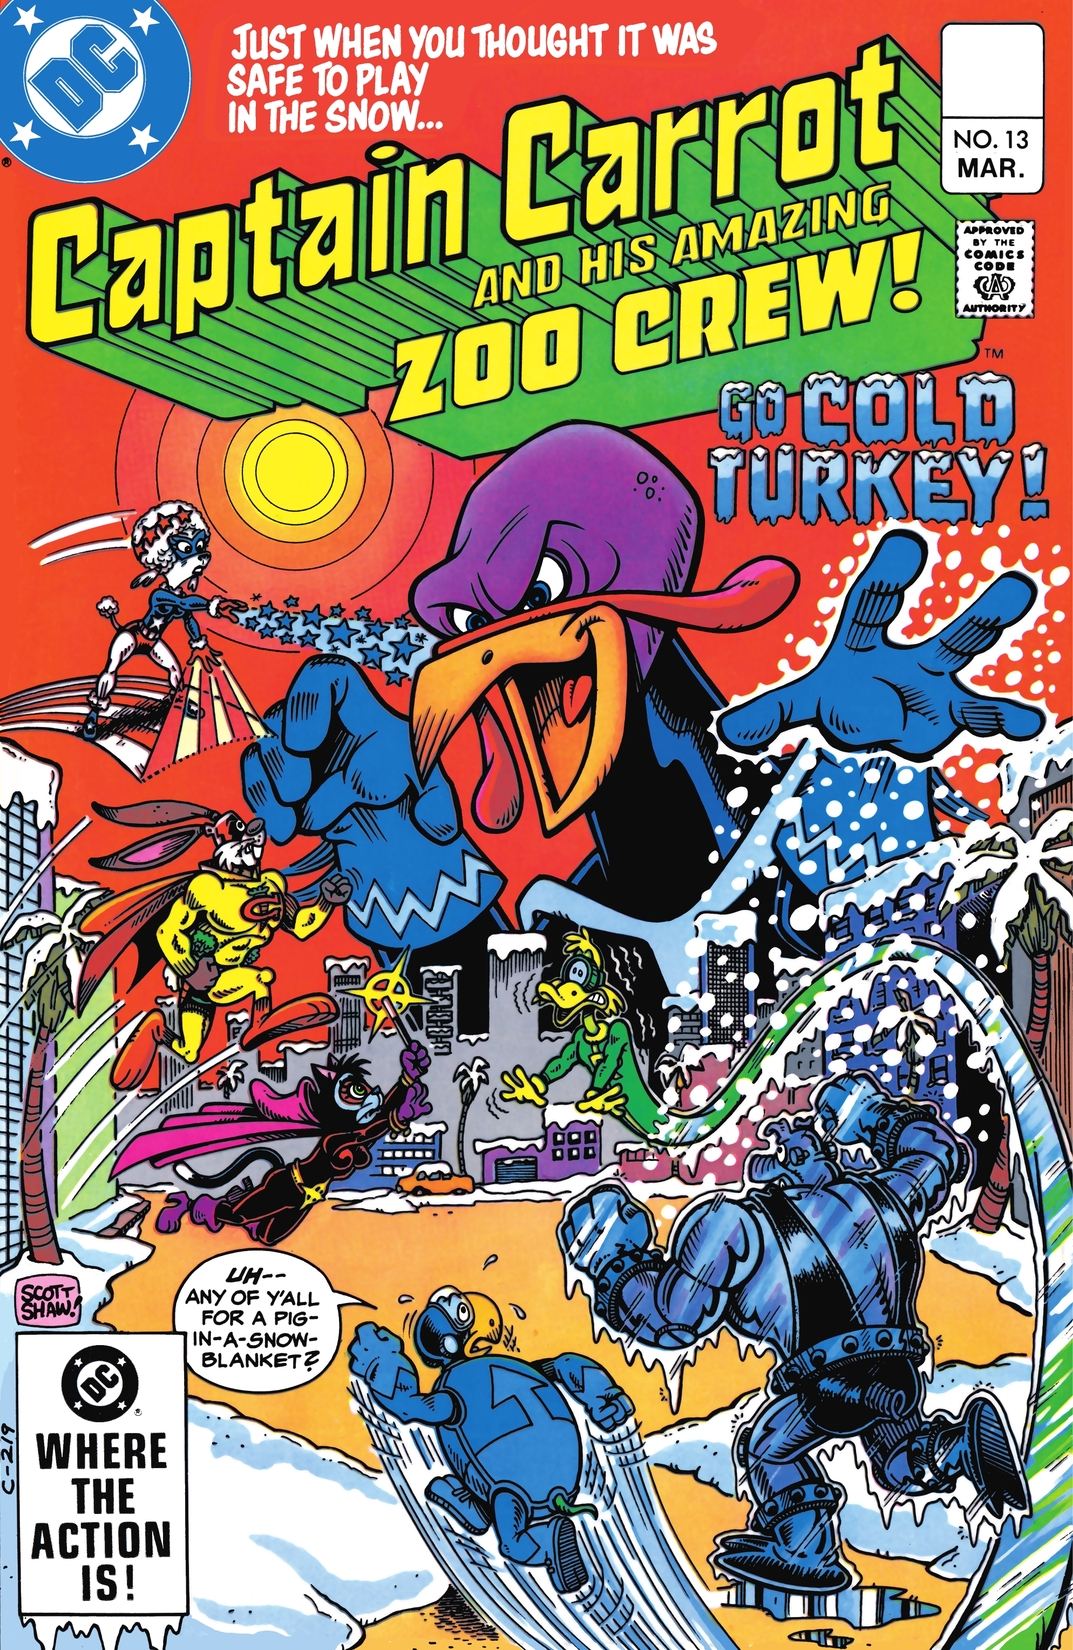 Captain Carrot and His Amazing Zoo Crew #13 preview images